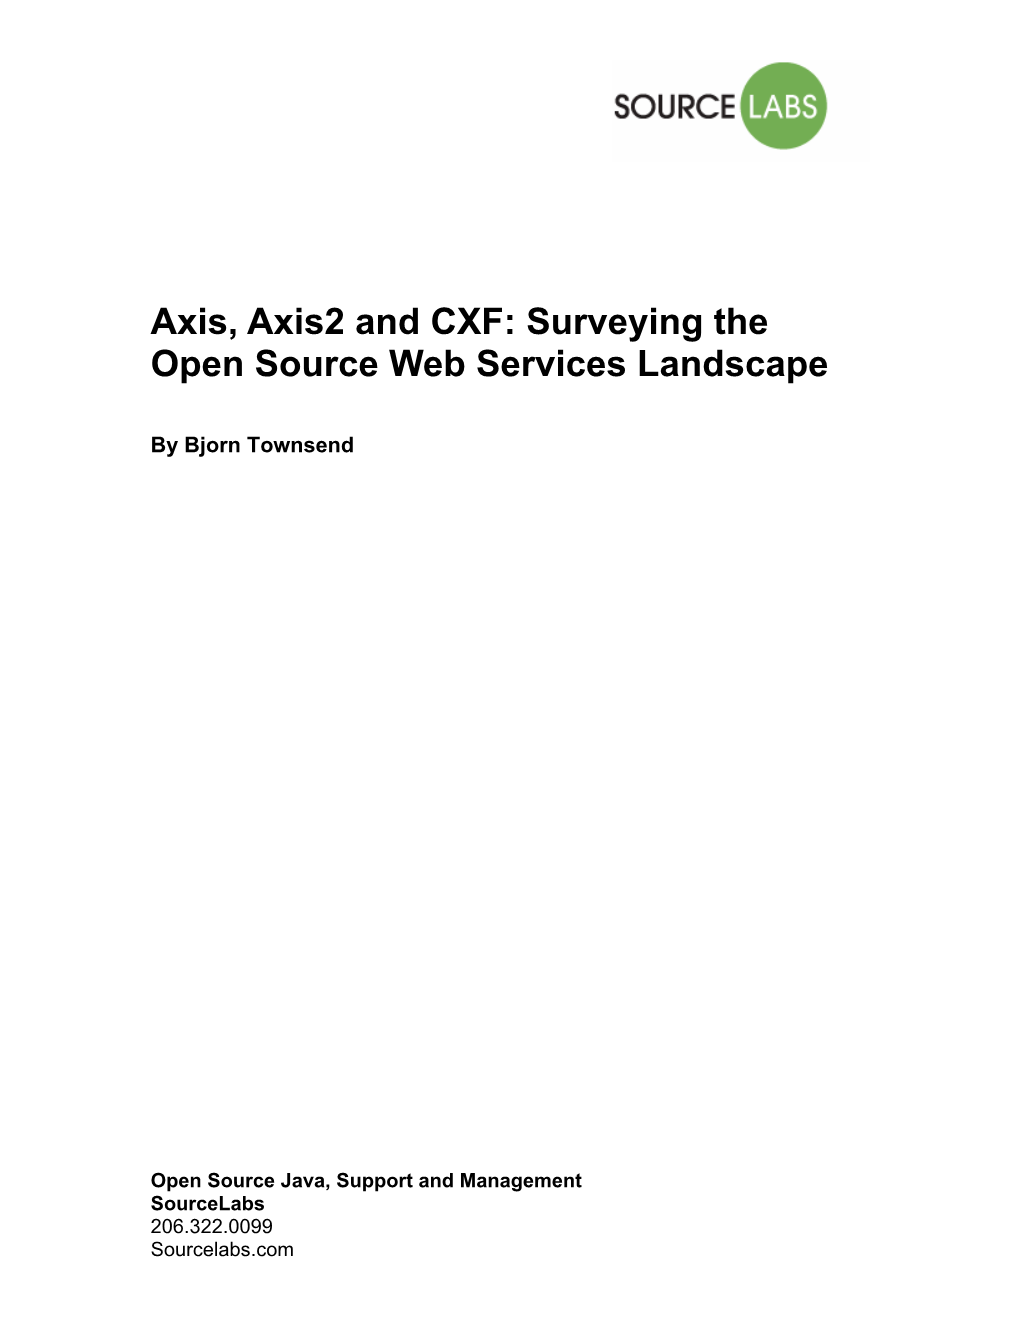 Axis, Axis2 and CXF: Surveying the Open Source Web Services Landscape